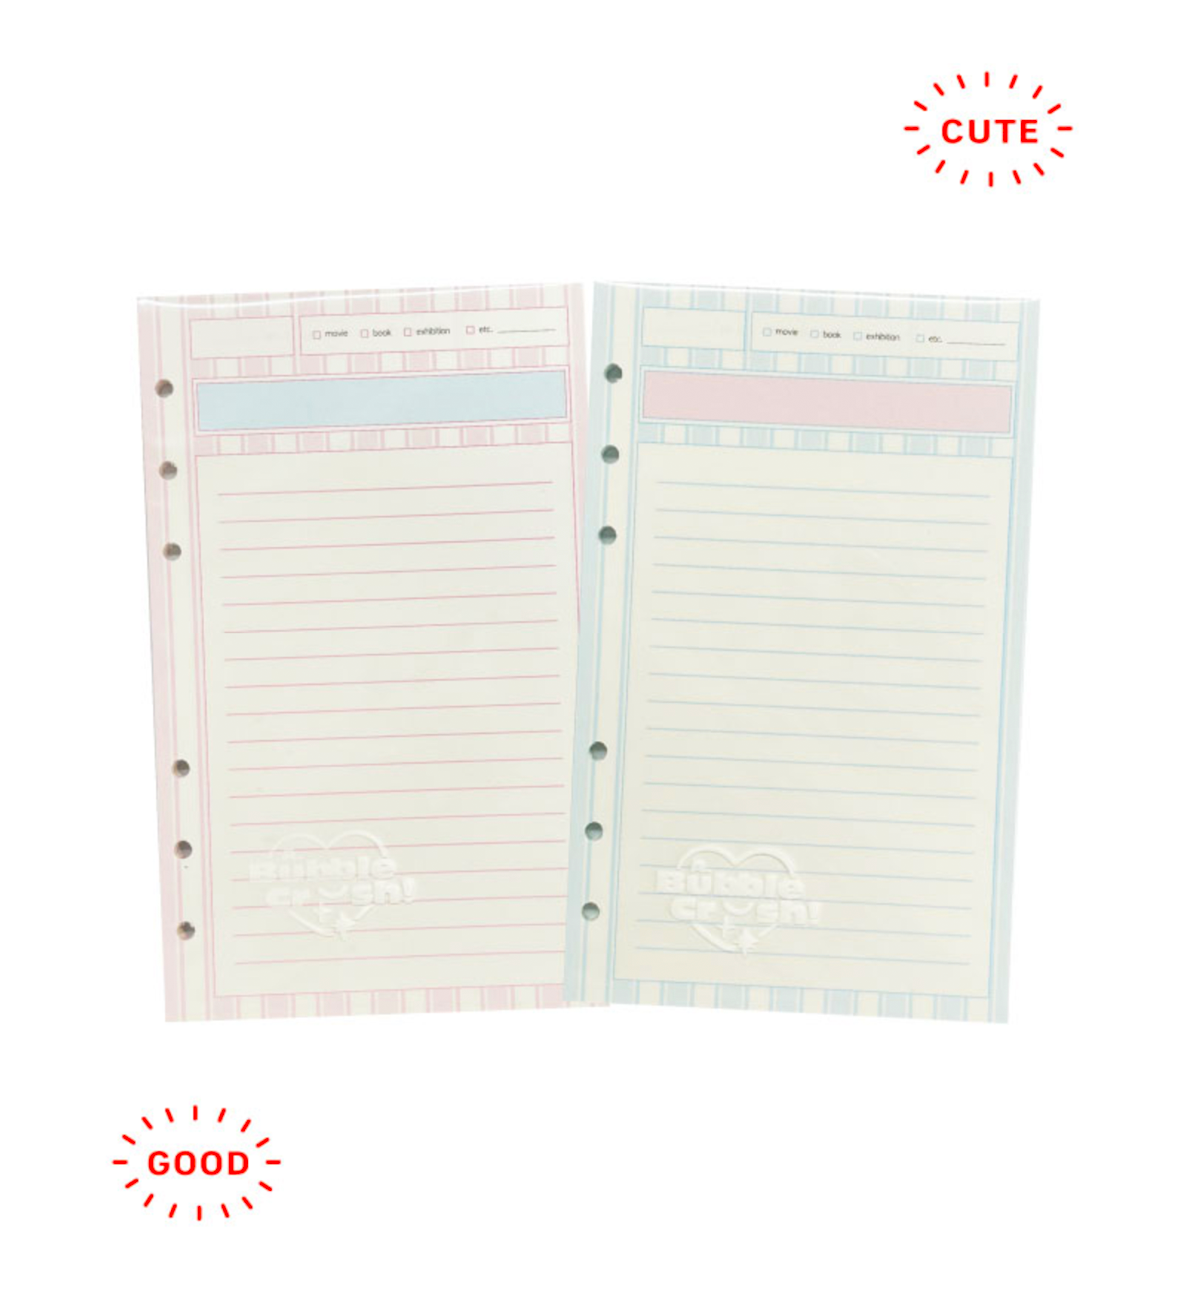 A6 Review Note Paper Refill [Blue]